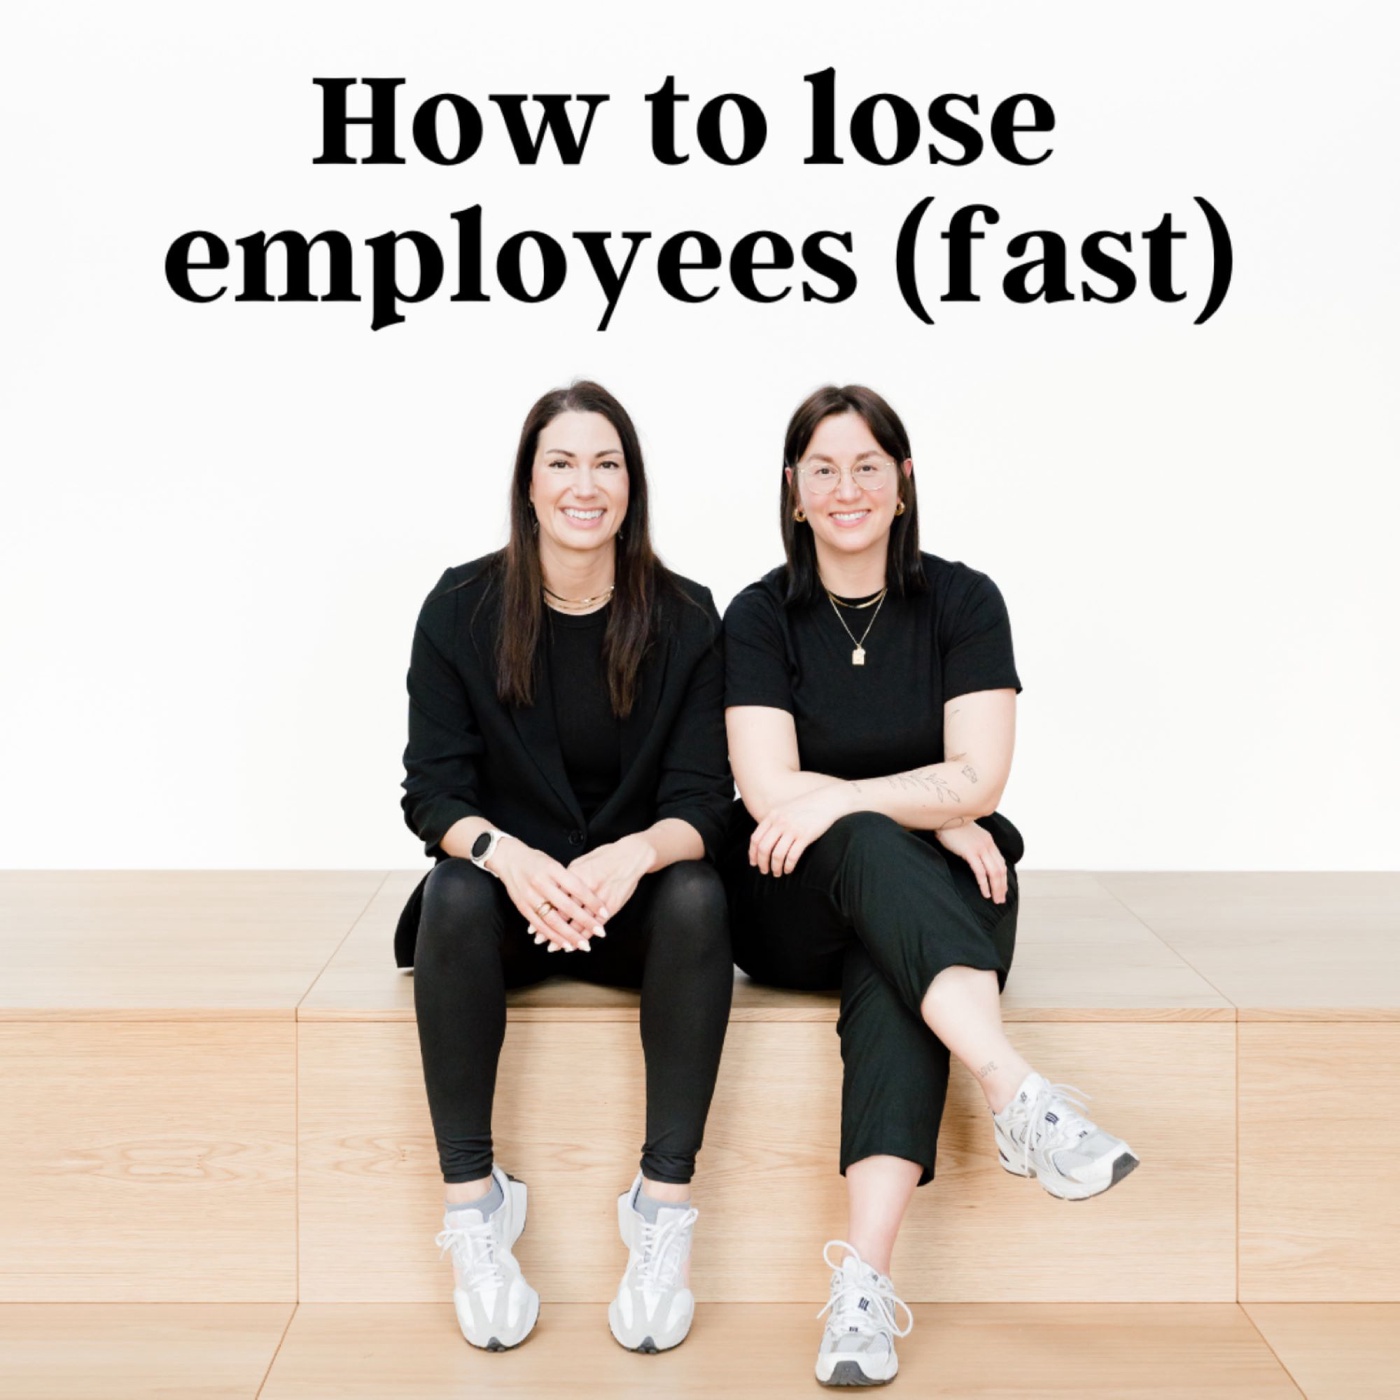 How to lose employees (fast)